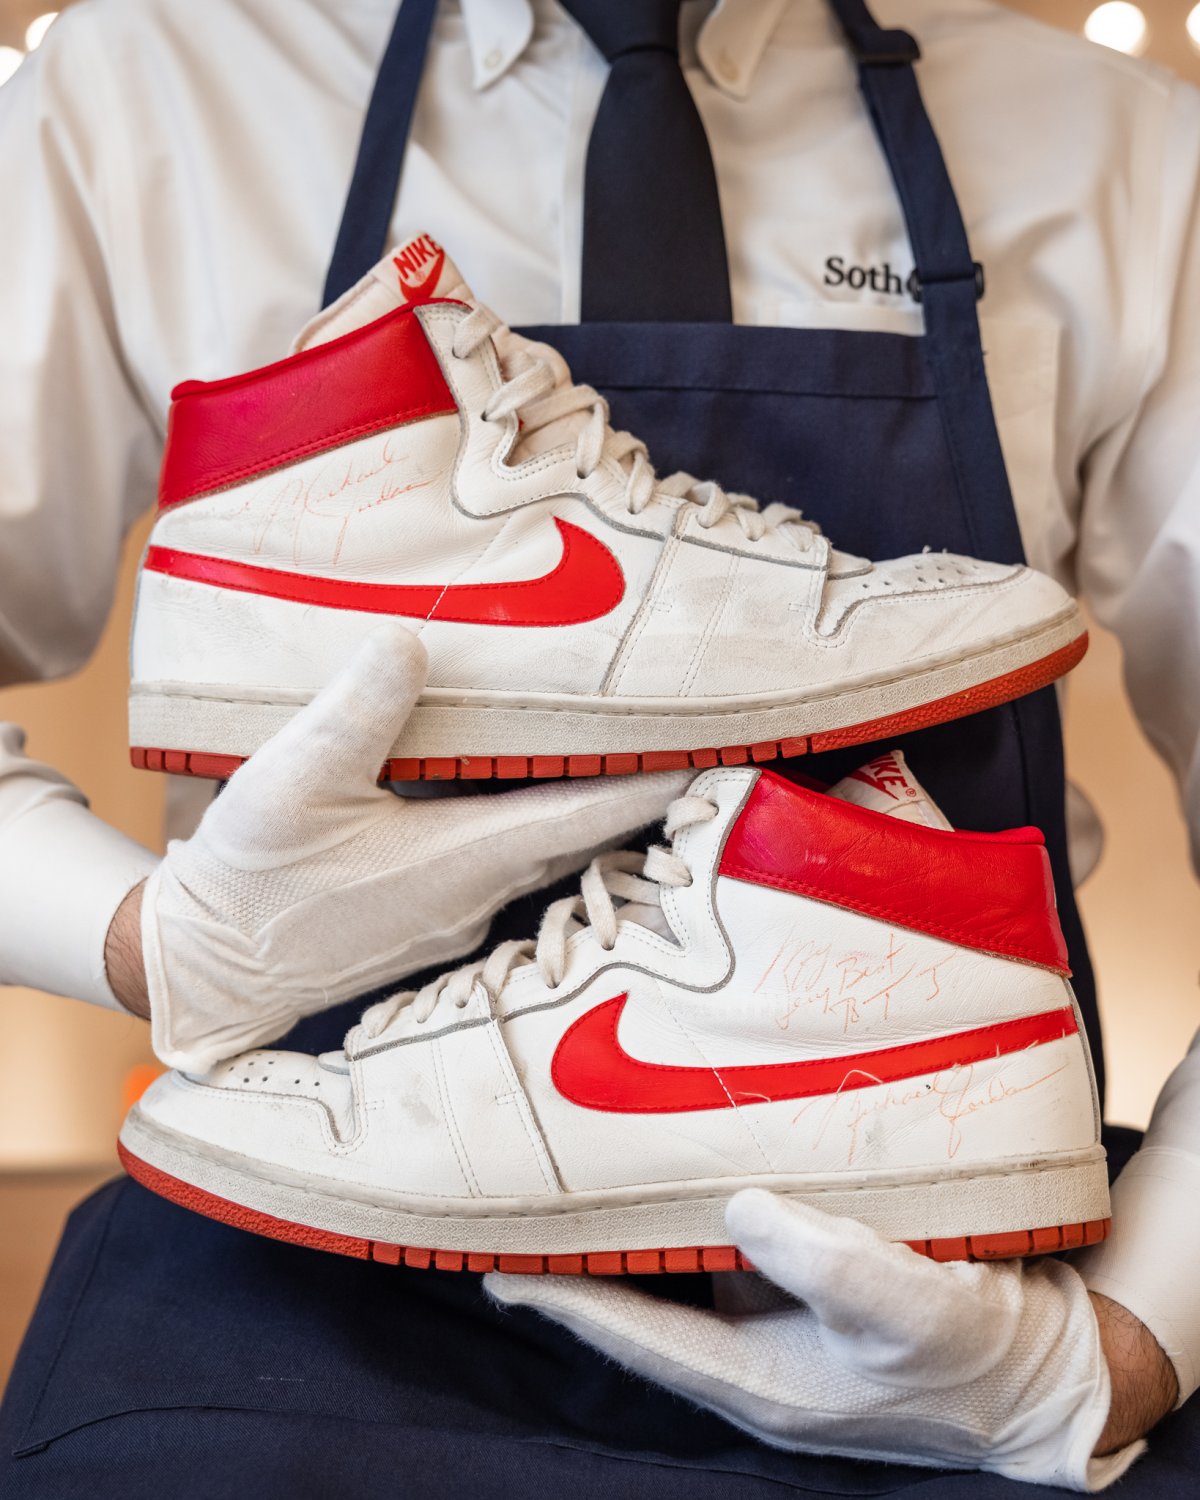 These Air Jordan 1s Are the Most Expensive Sneakers Ever